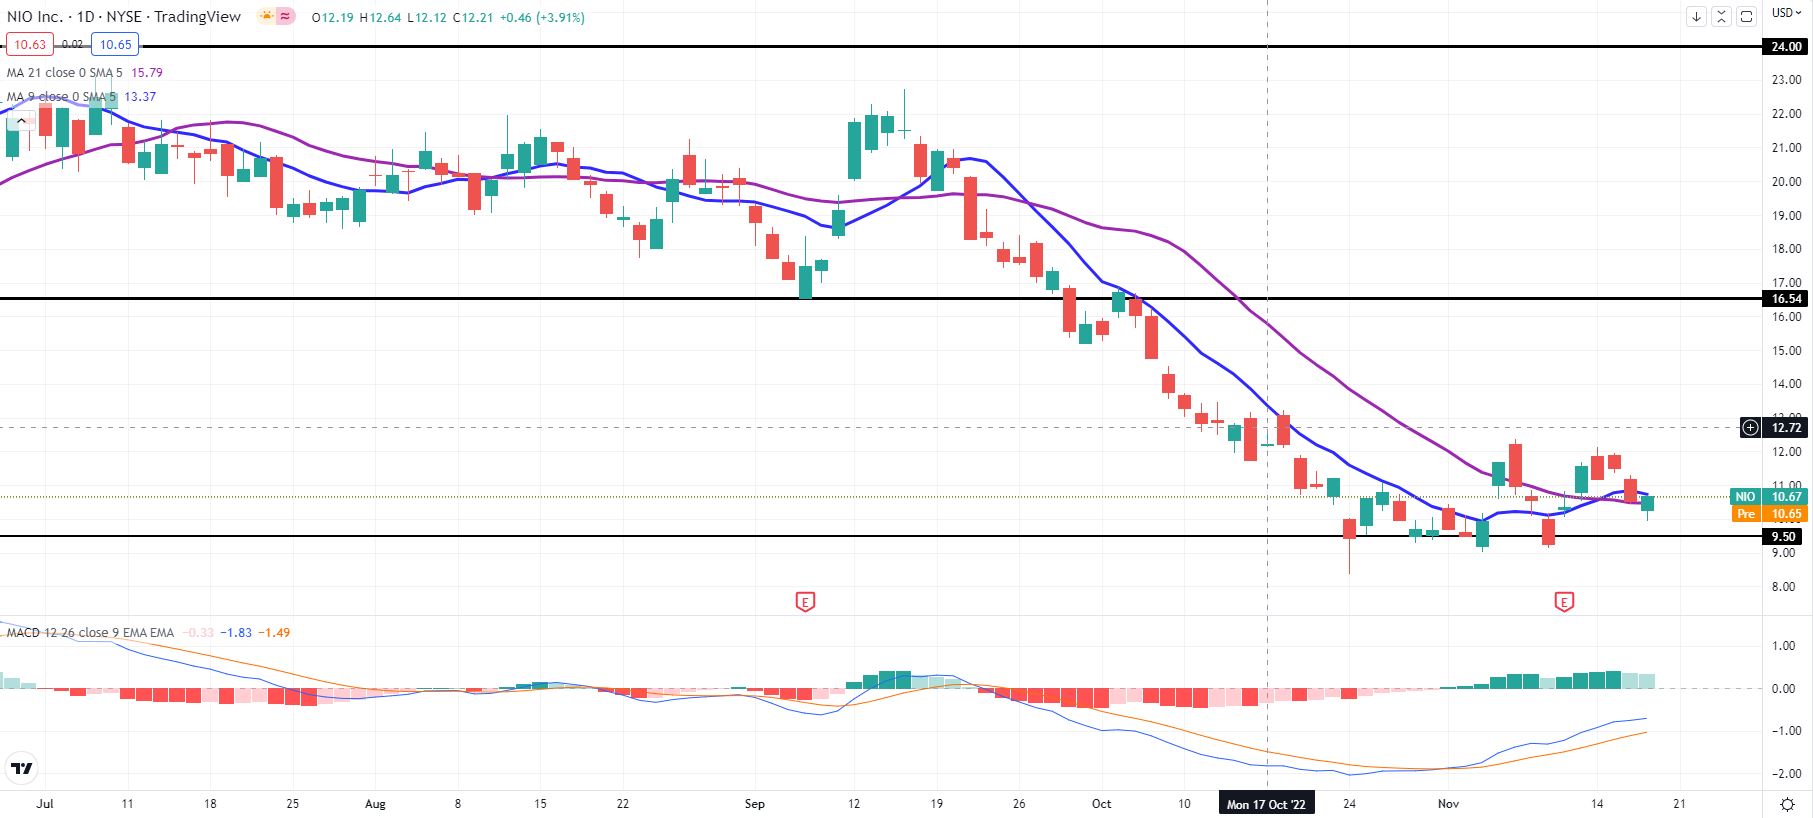 NIO stock daily chart shows downtrend continuation